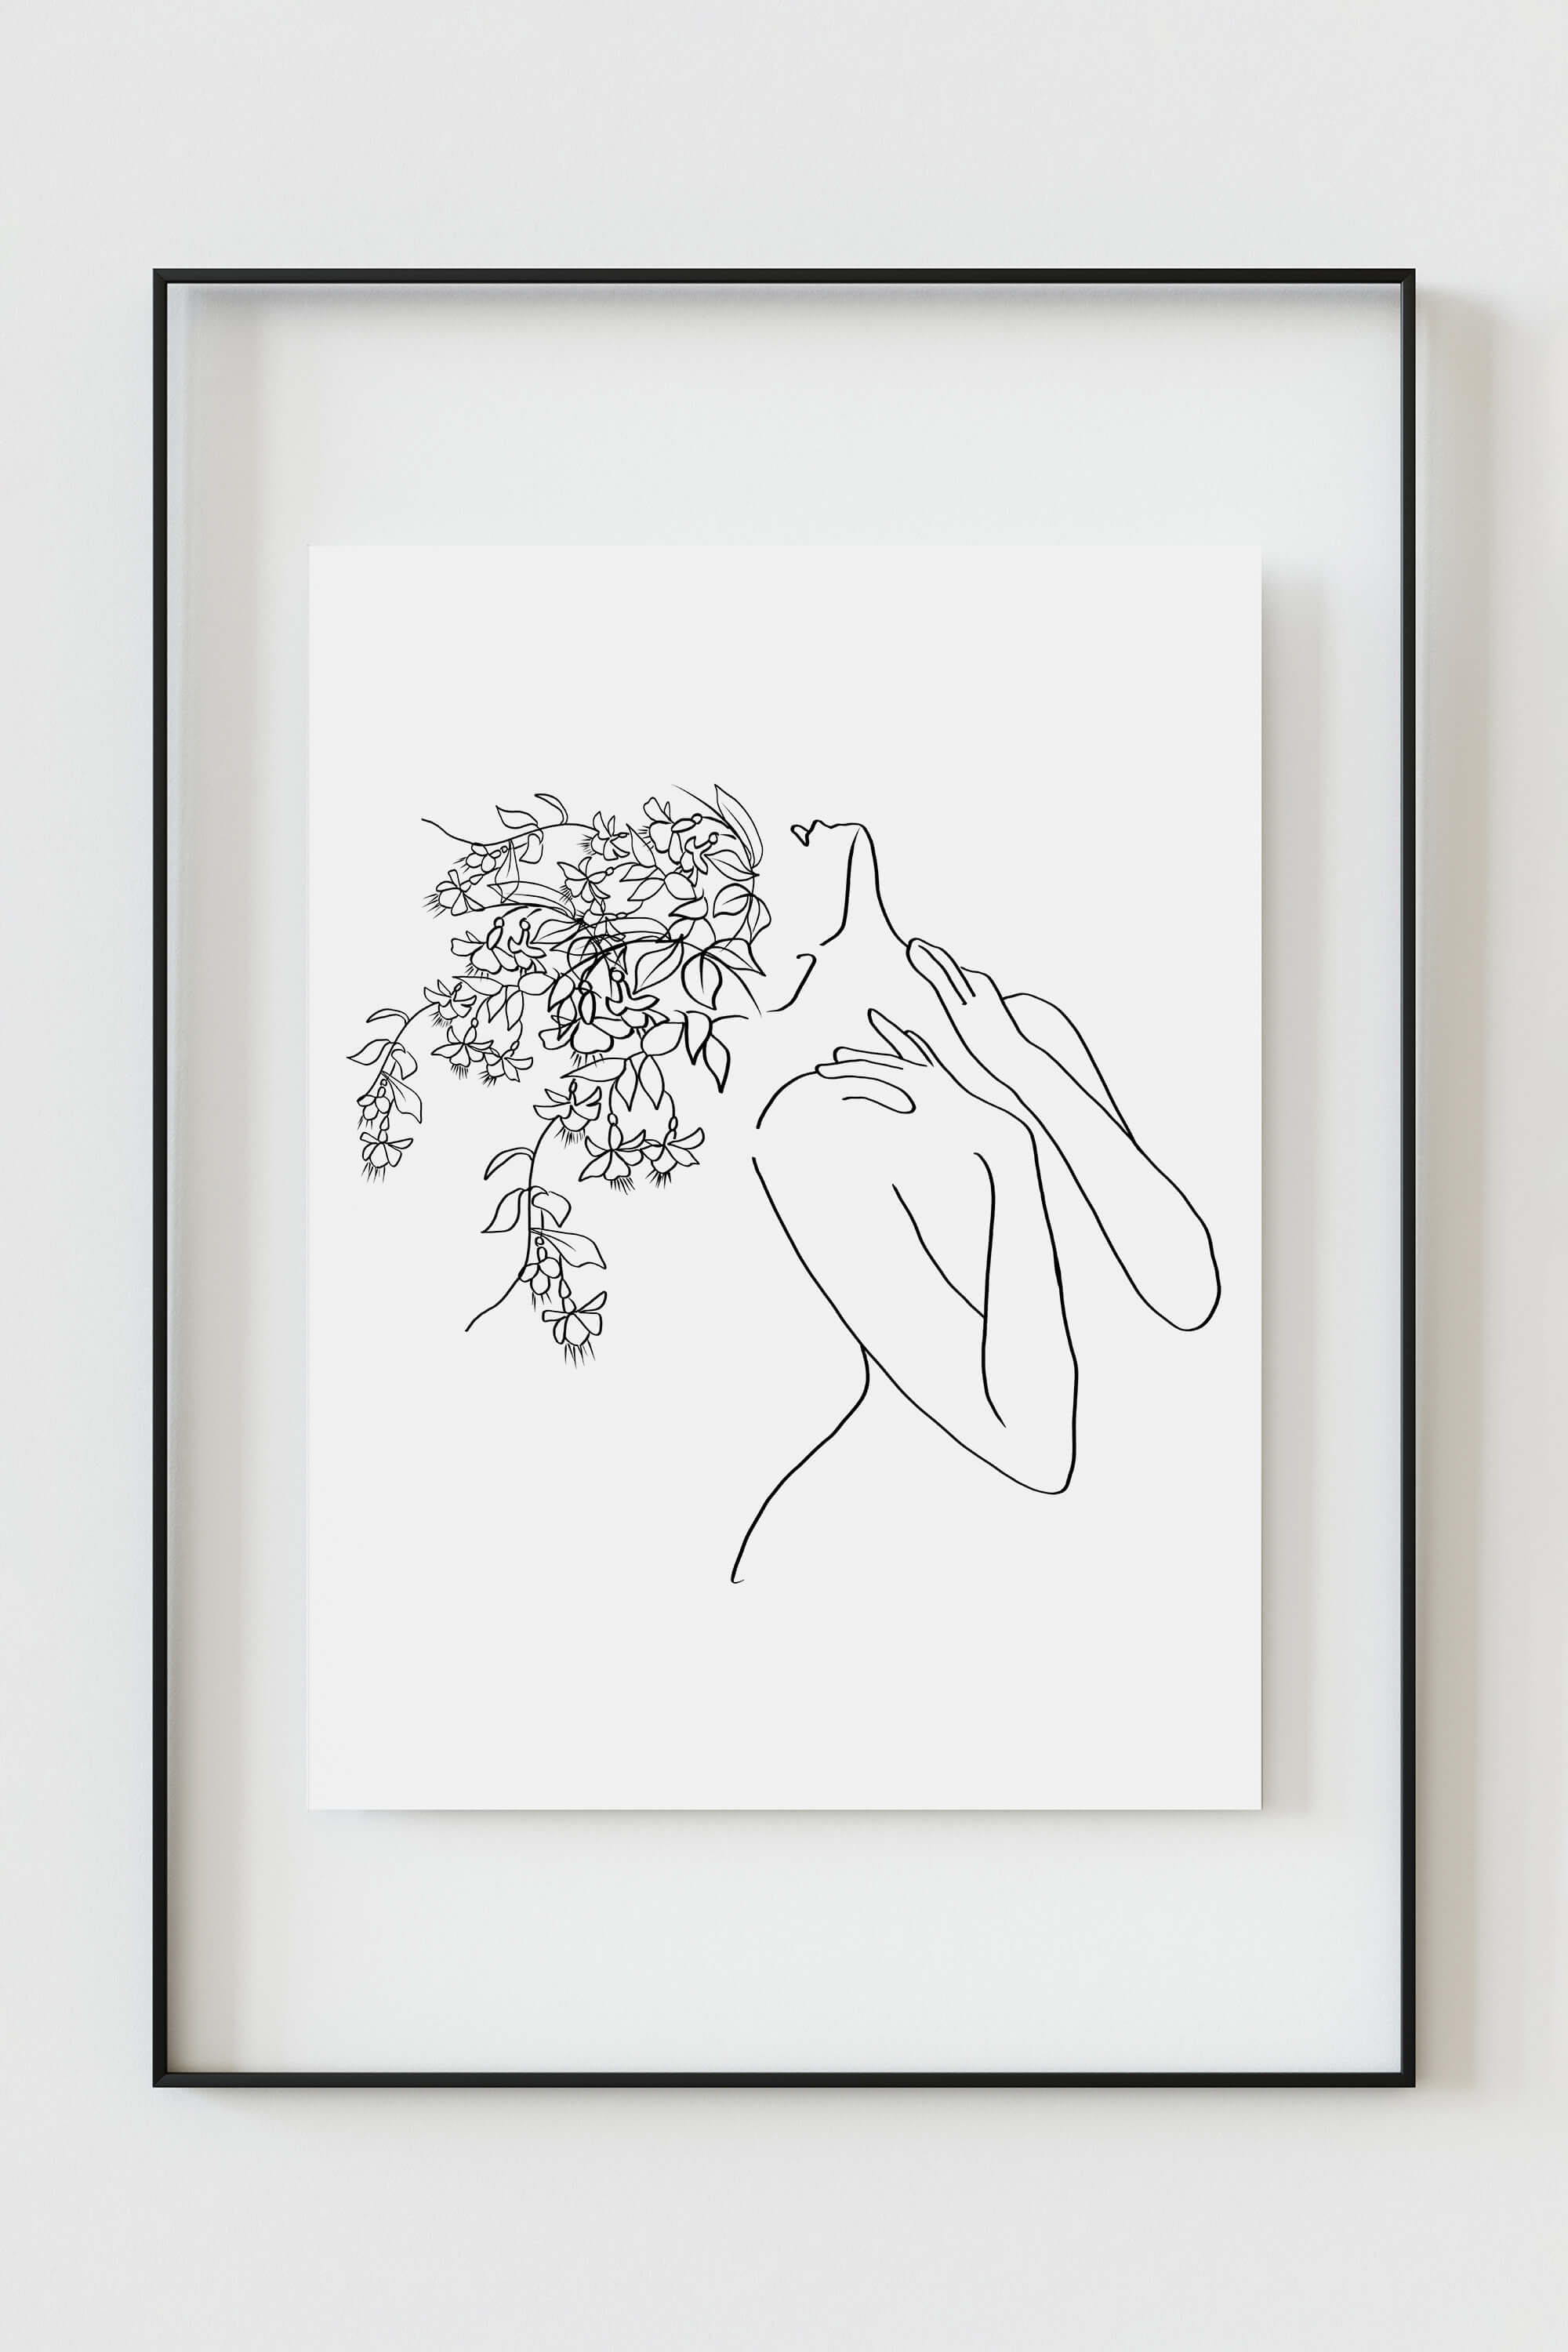 Original art print in classic black and white, showcasing a captivating blend of timeless beauty. Each stroke tells a story, creating an elegant and contemporary piece suitable for any space.